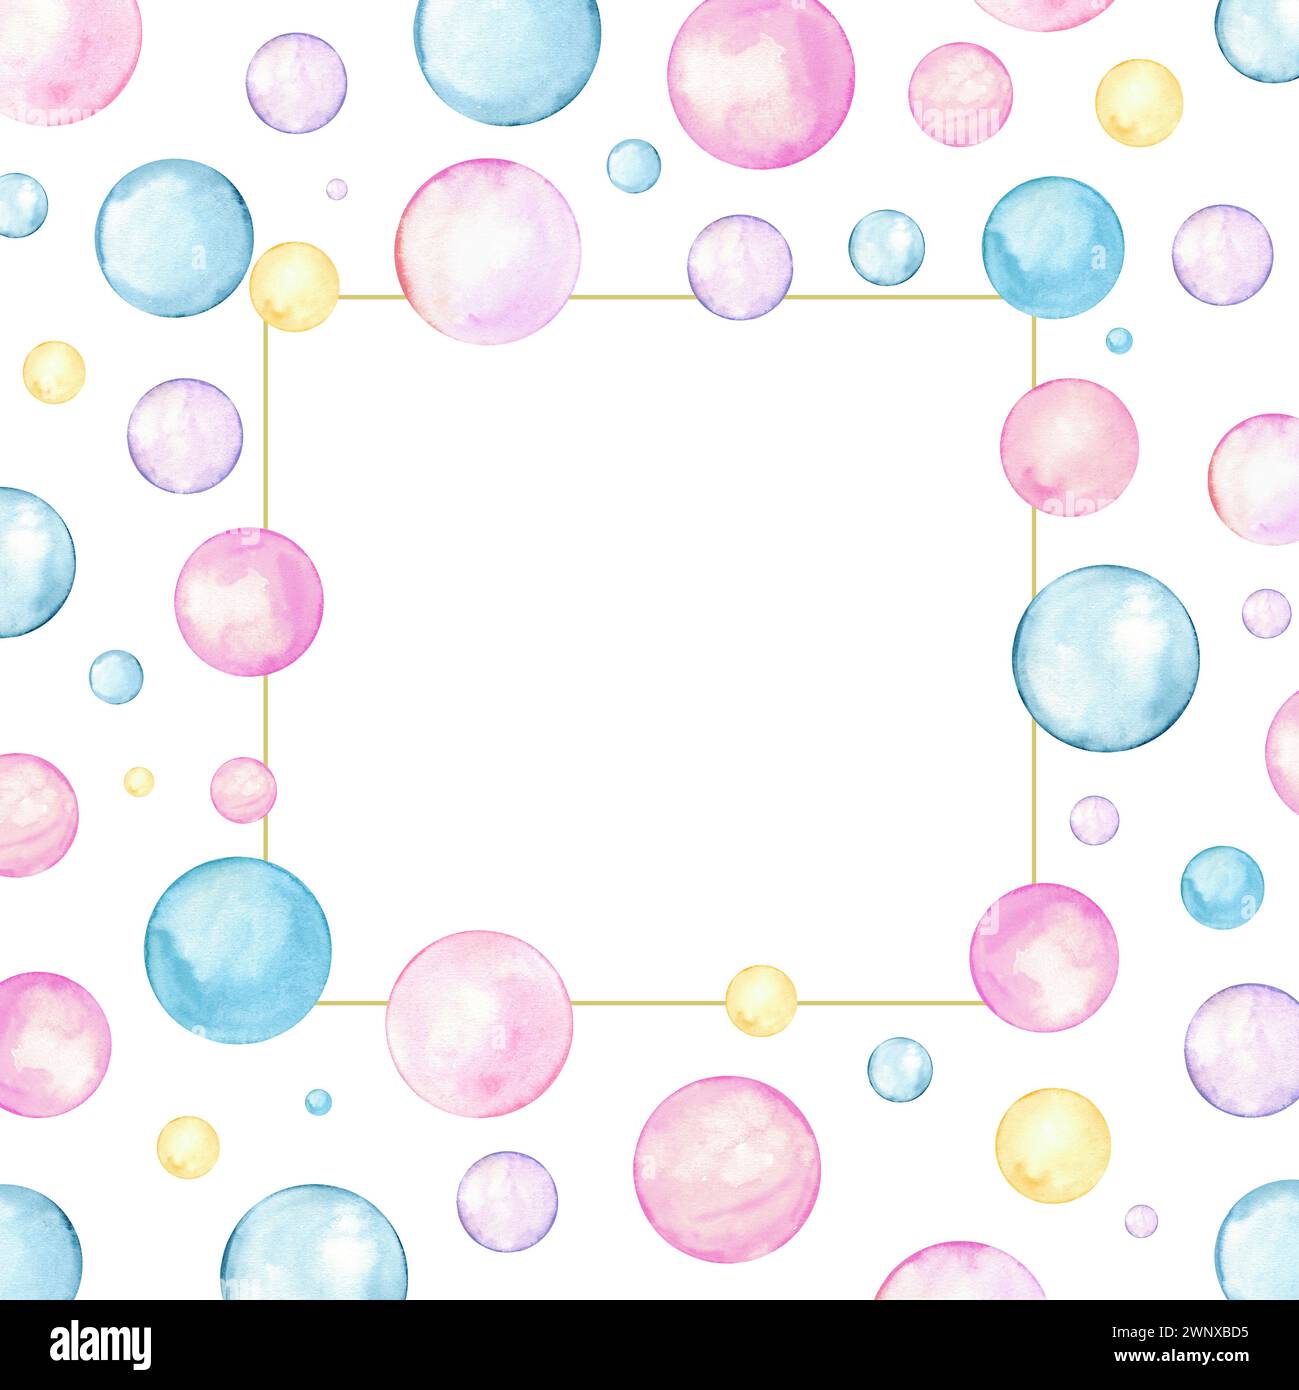 Geometric watercolor frame with copy space for text. Pink, blue, yellow polka dots. Circle, confetti. Splashes, bubbles, round doodle spots. Stock Photo